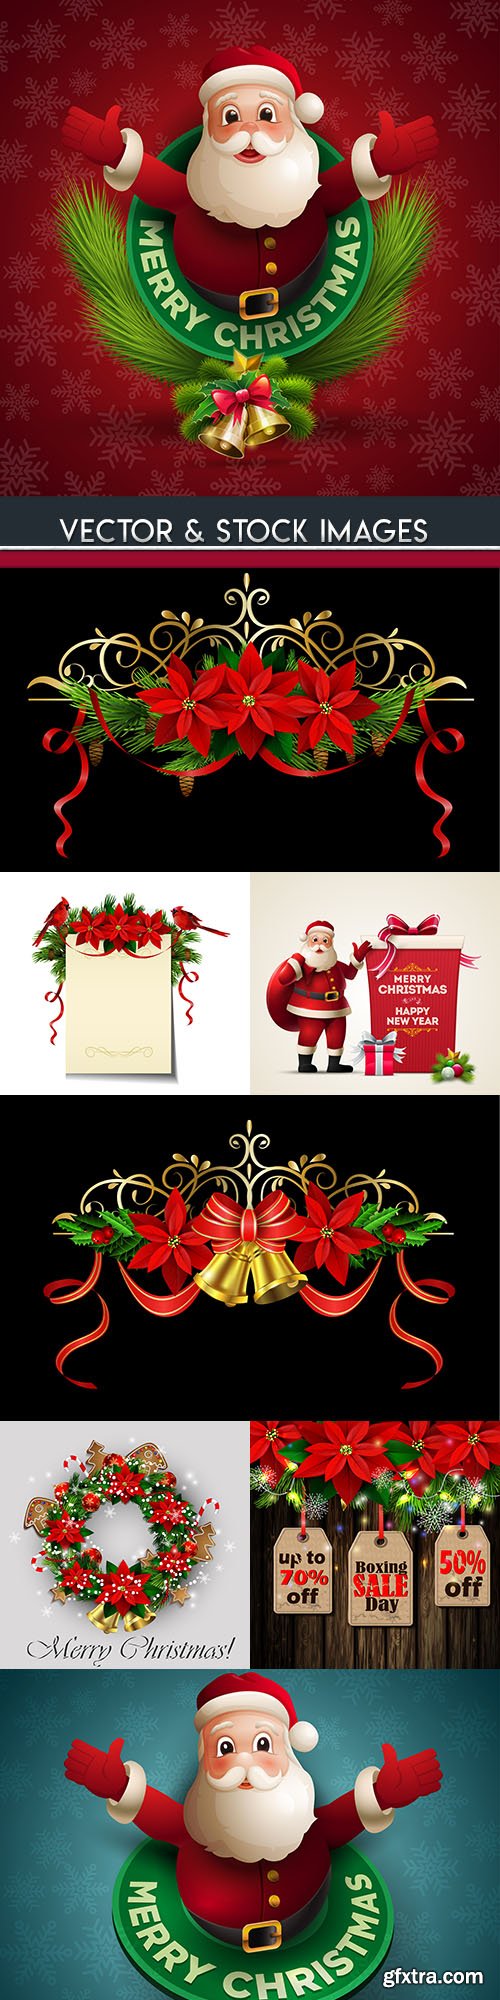 Santa funny Christmas flowers and decorative elements